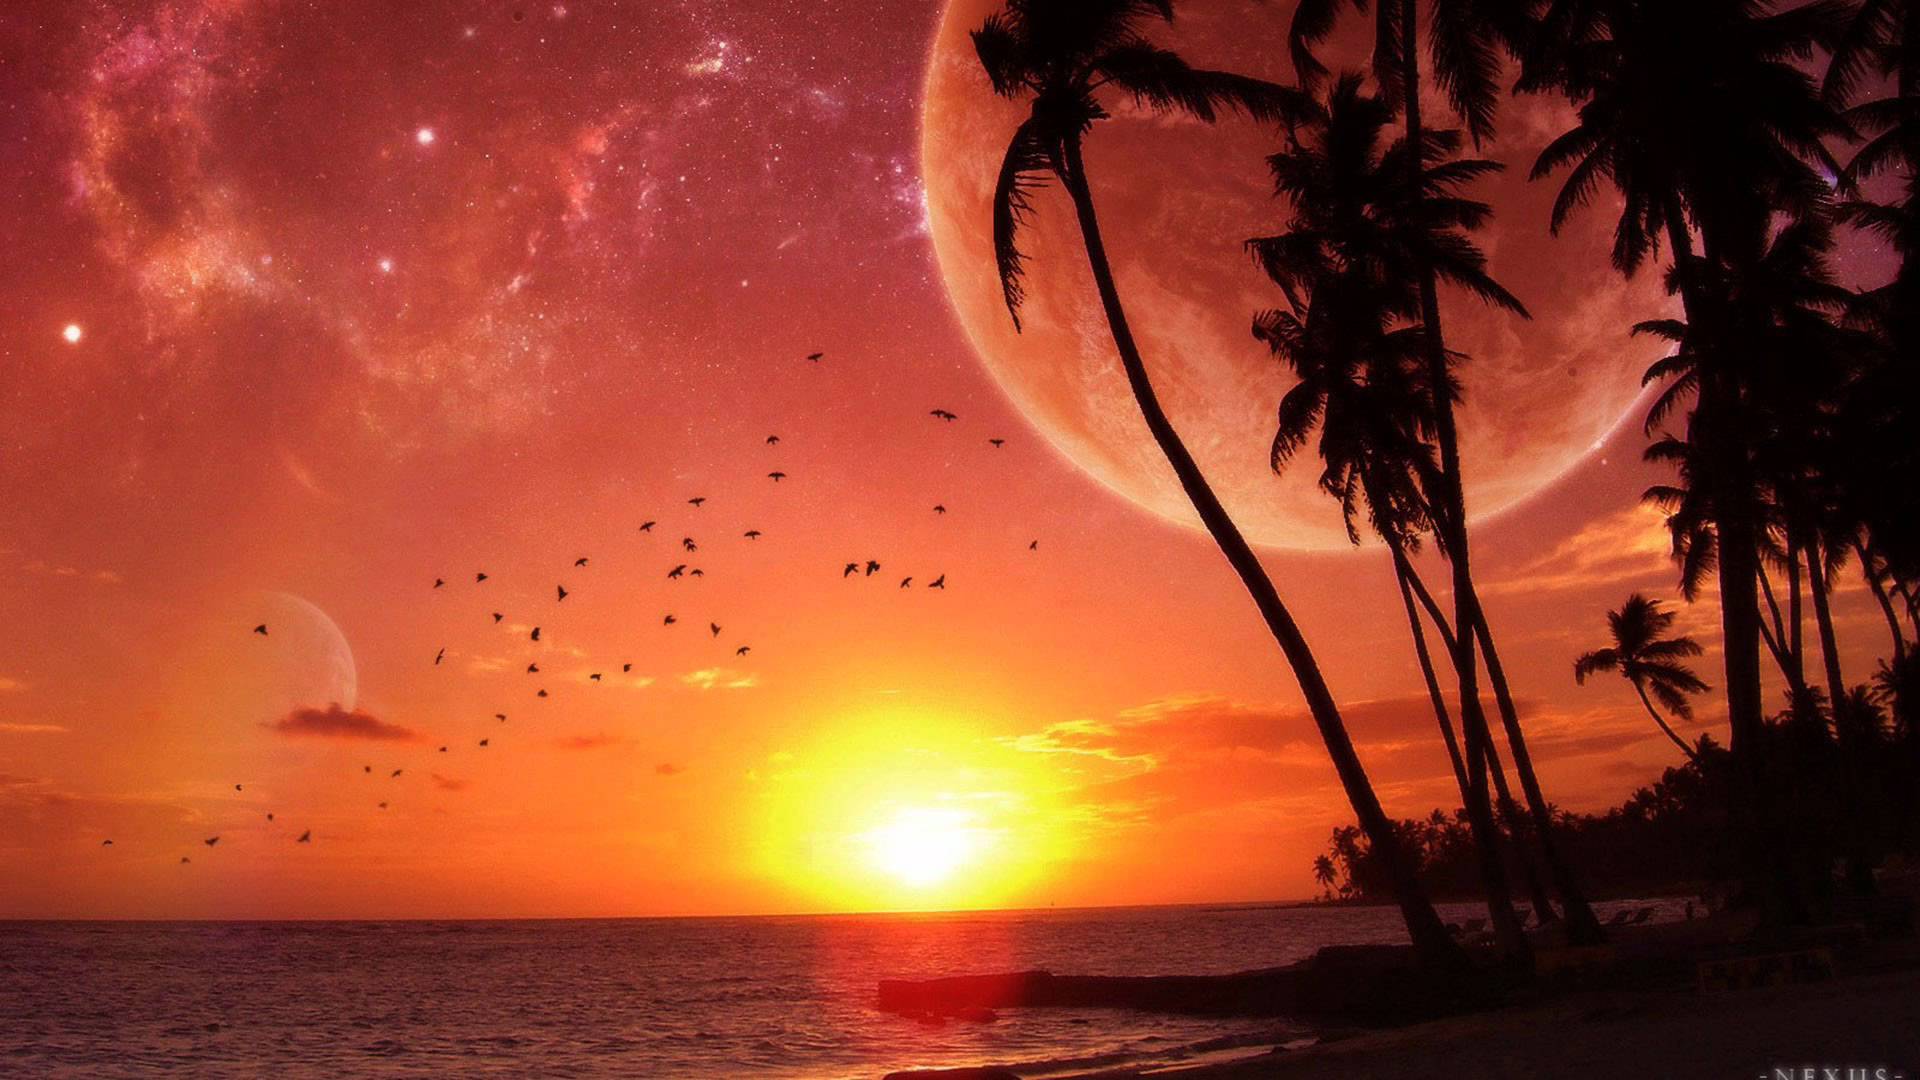 Tropical Sunset Wallpaper for PC & Mac, Tablet, Laptop, Mobile